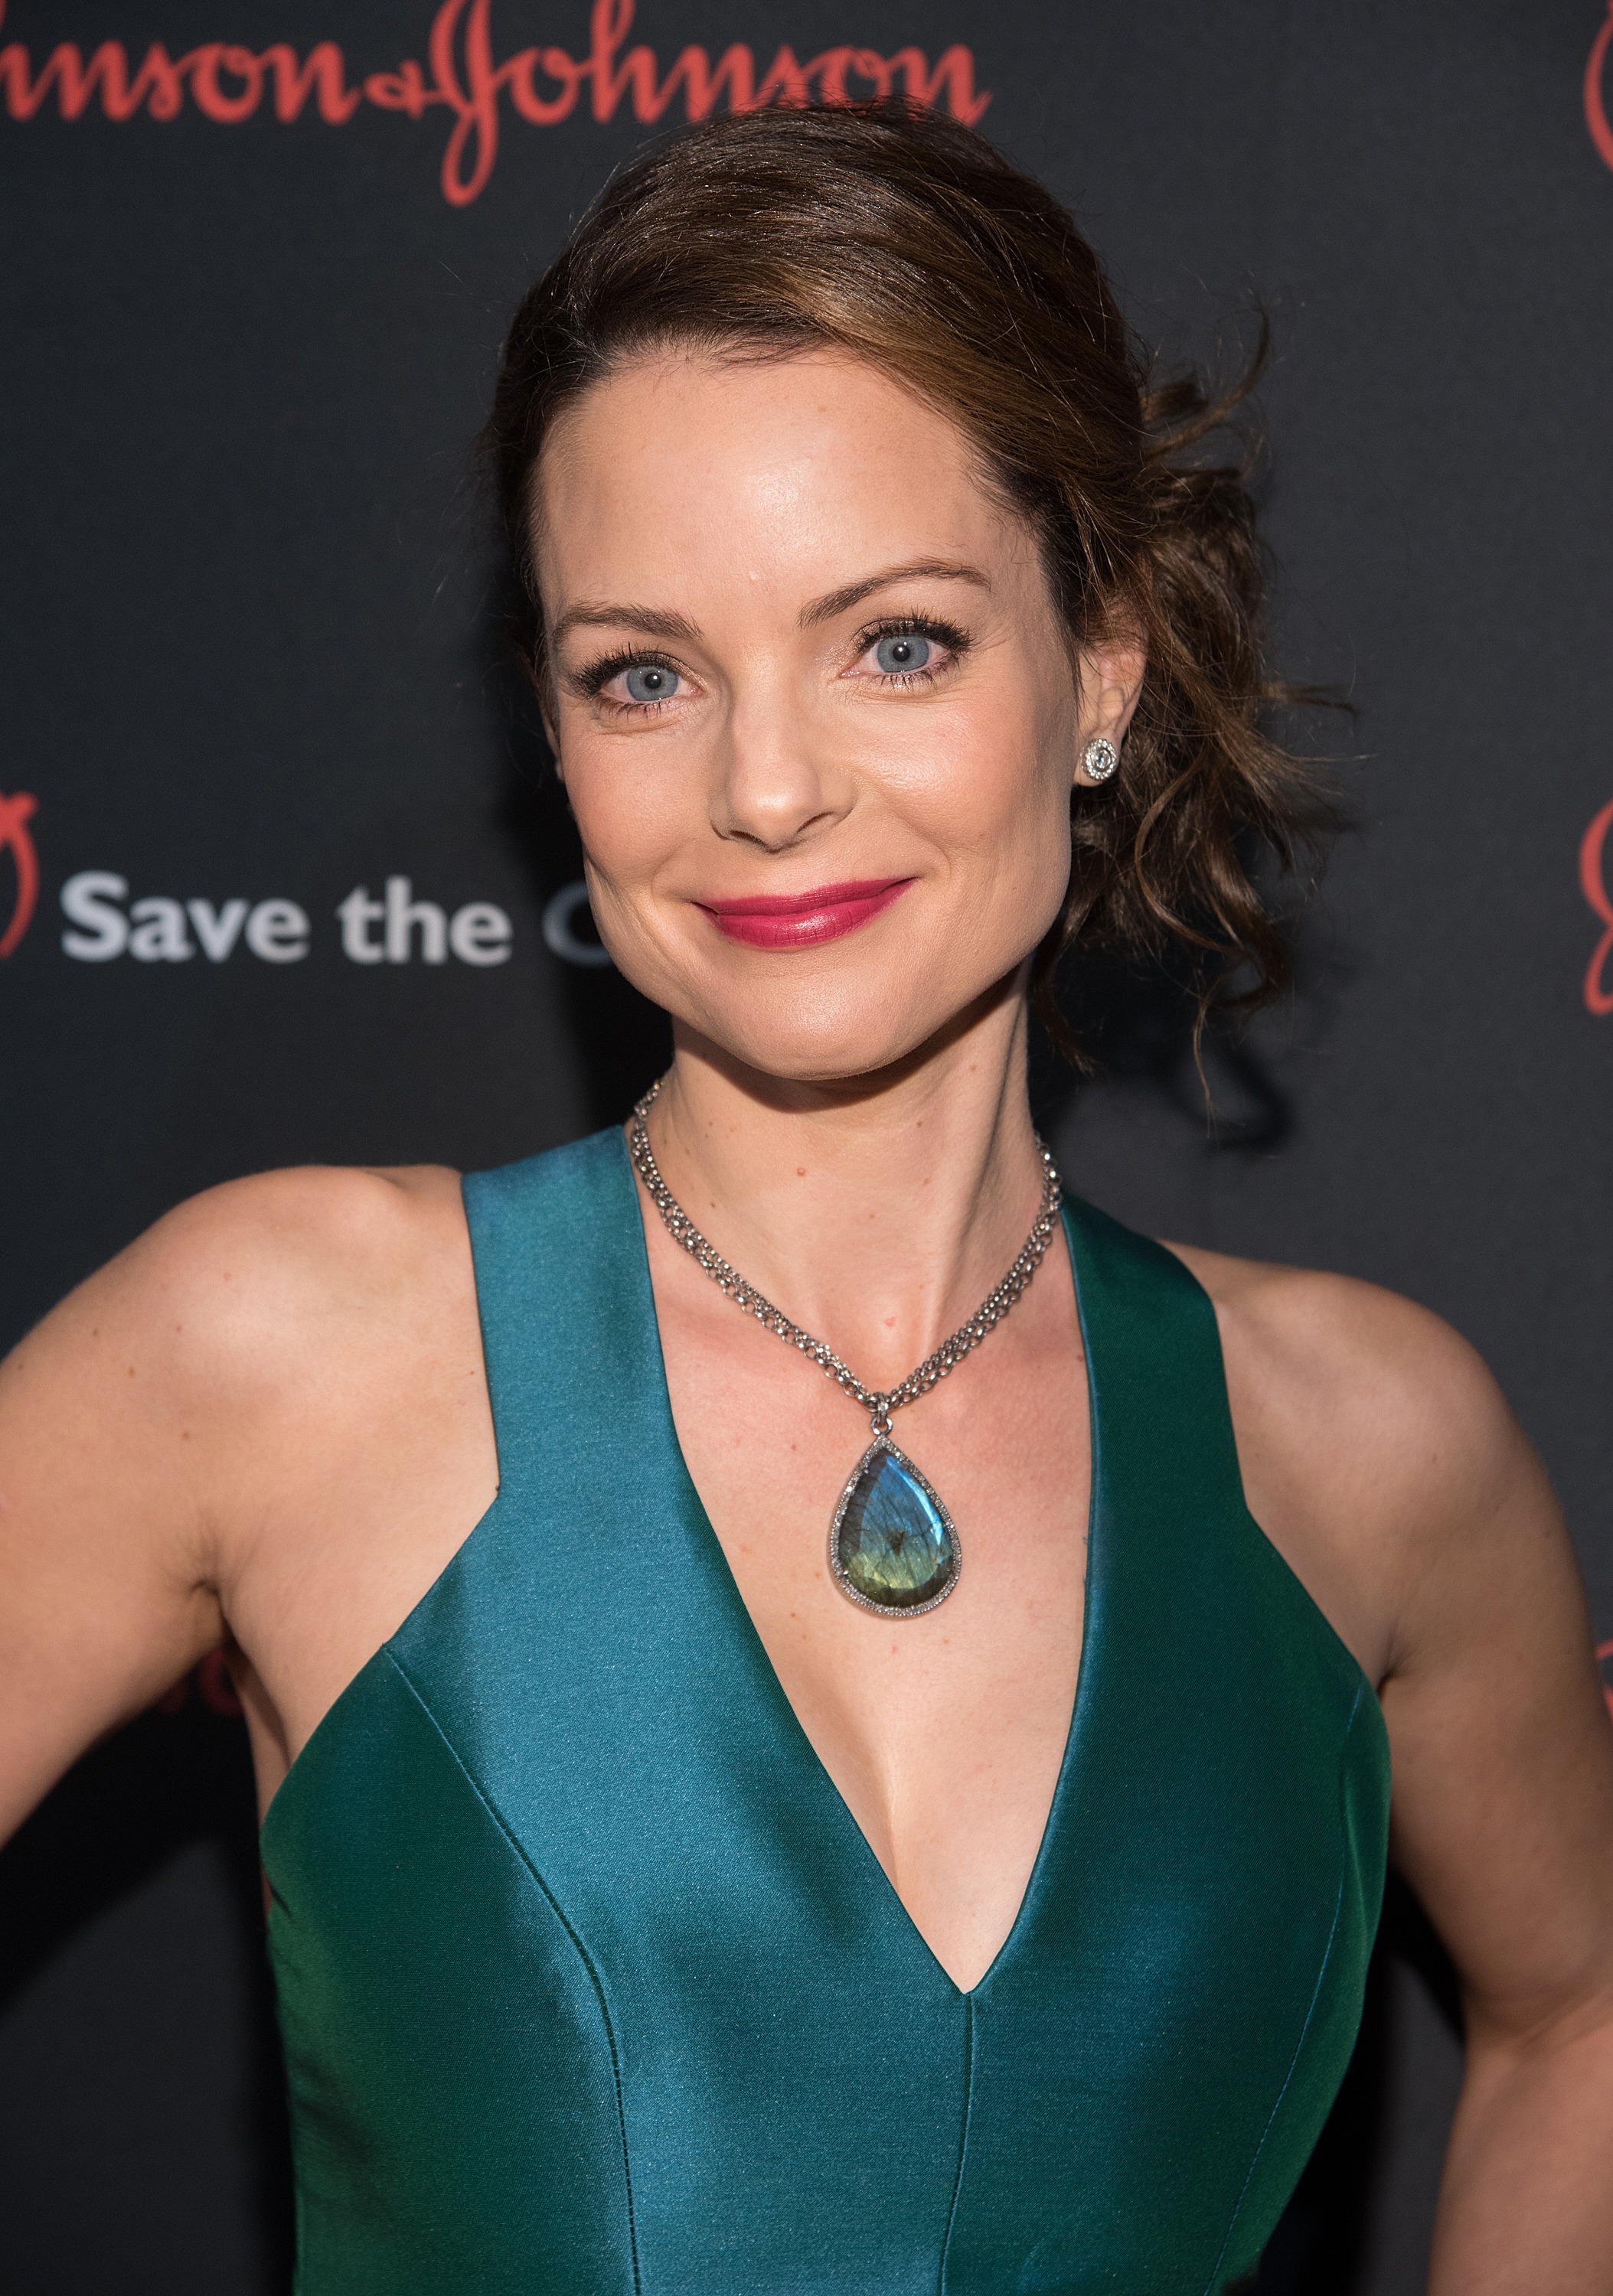 kimberly-williams-paisley-pictures